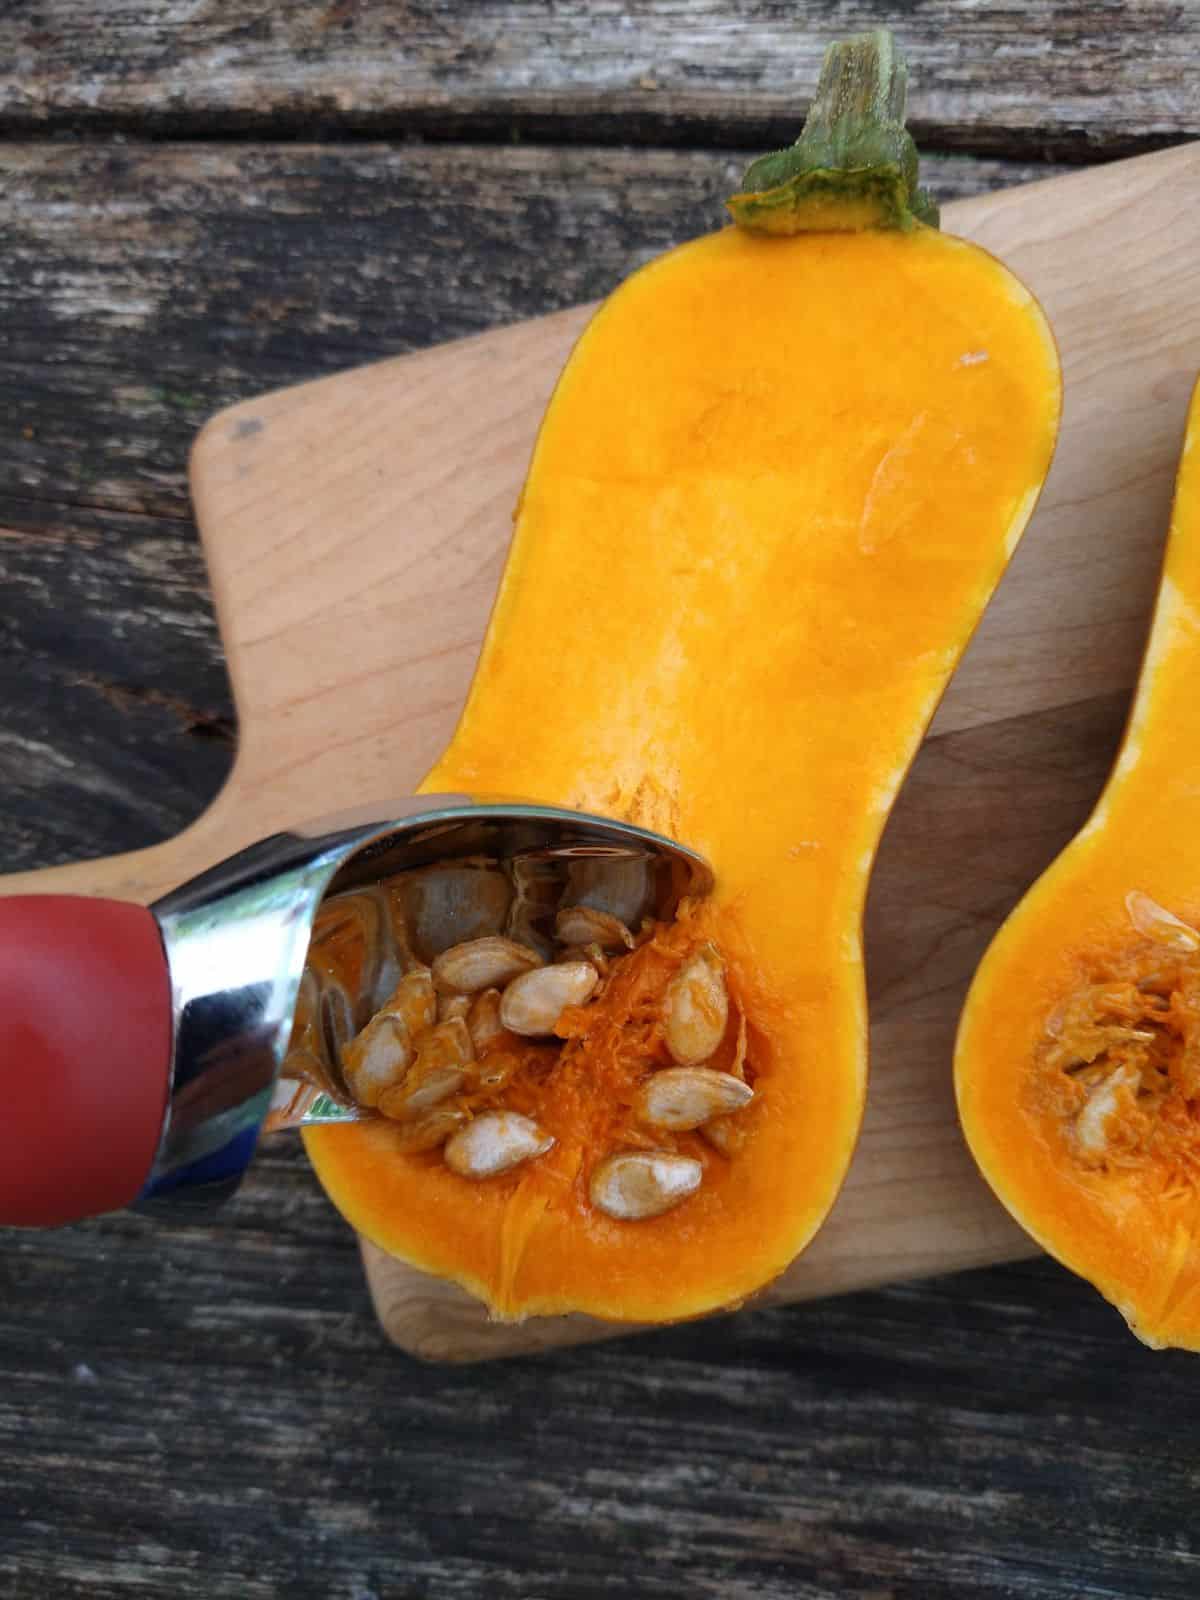 Two halves of a Honeynut squash getting the seeds scooped out with a ice cream scoop.